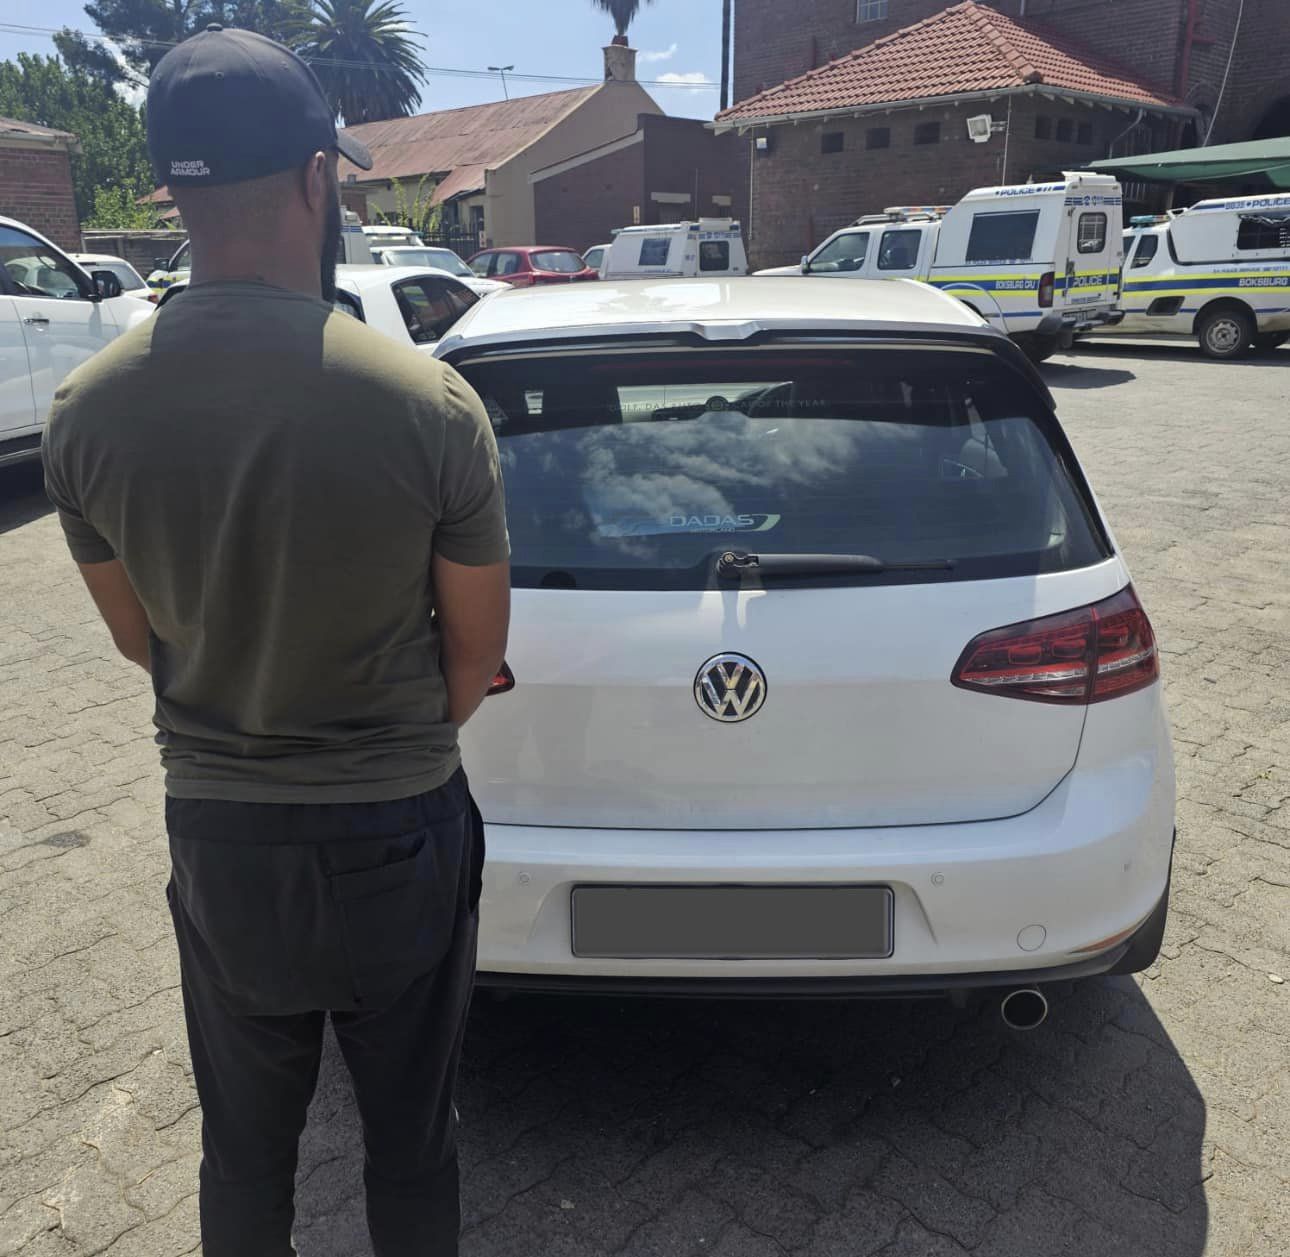 A 32-year-old was arrested for fraud charges in Boksburg